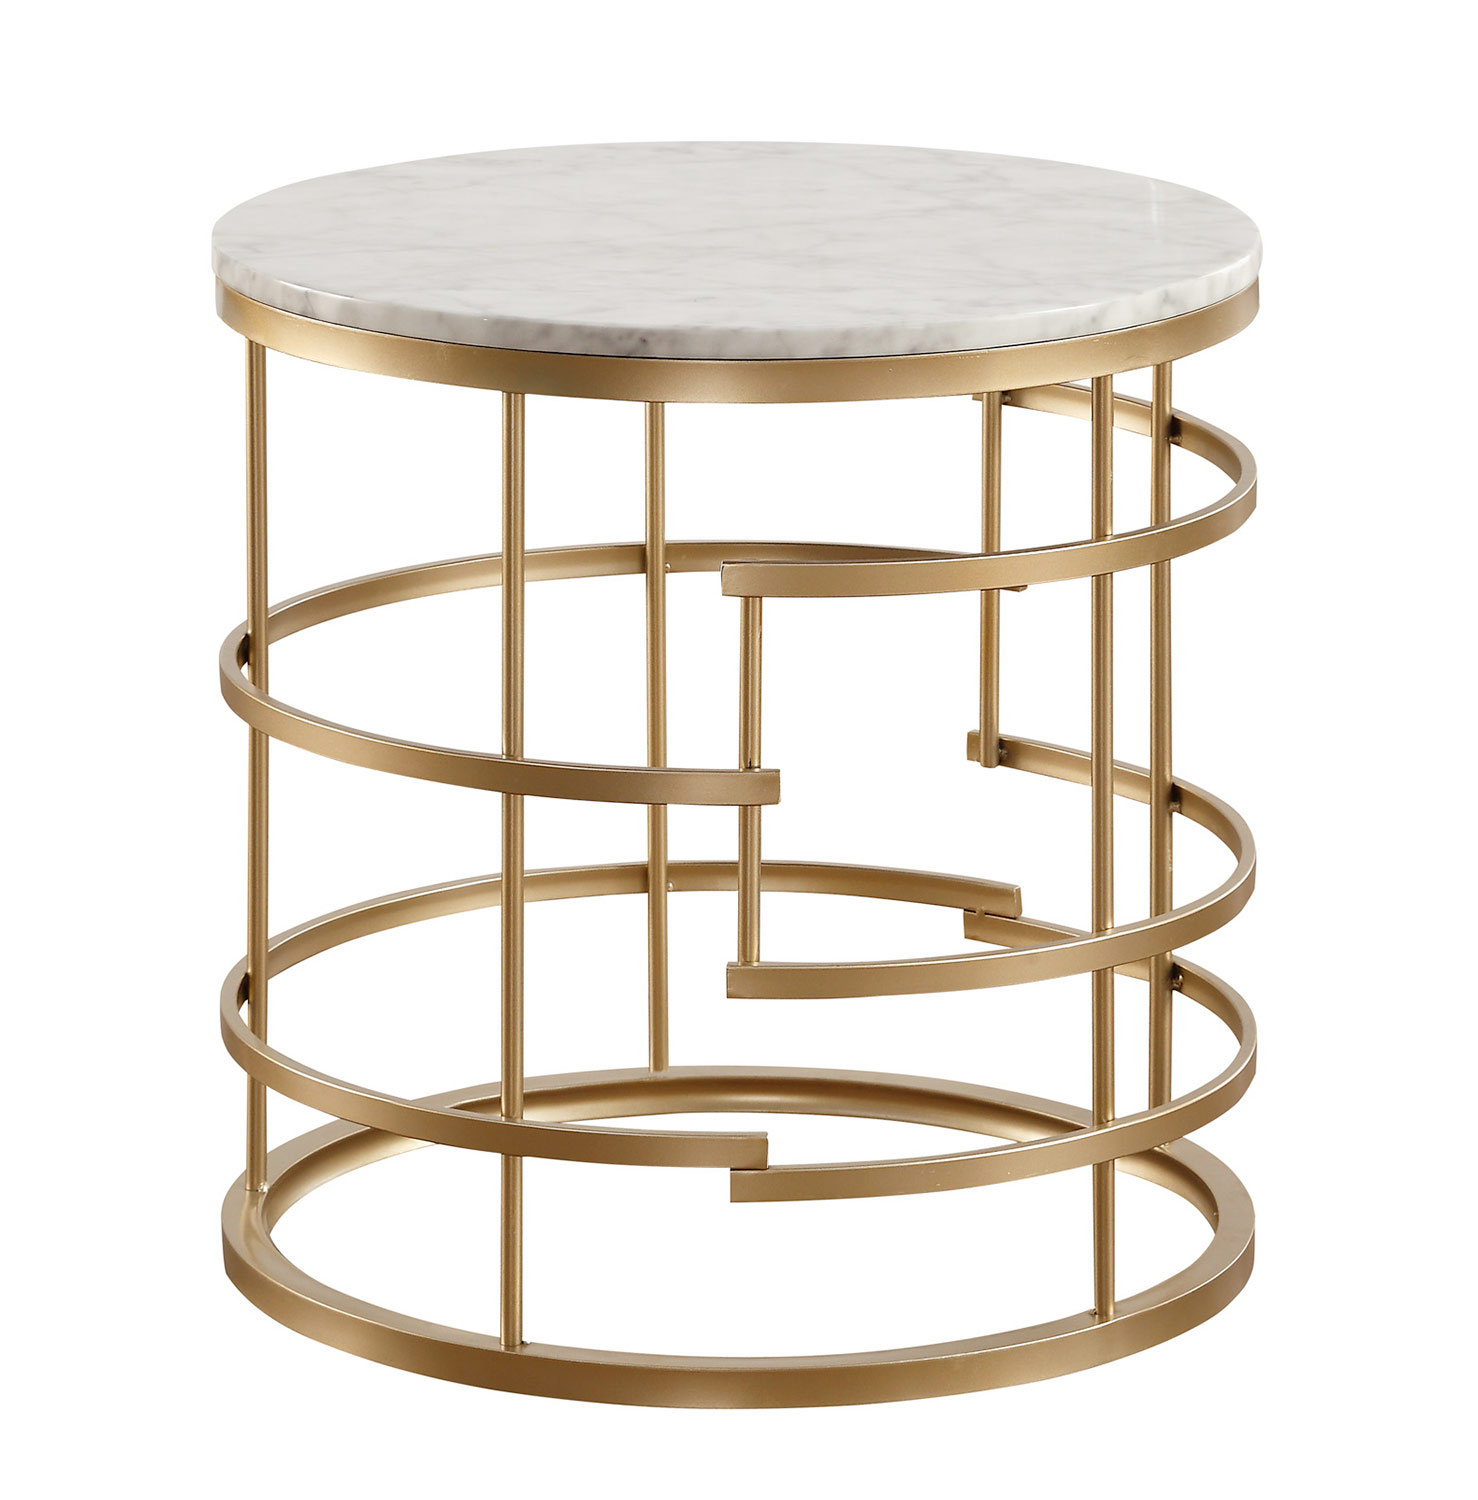 Homelegance Brassica Round End Table with Faux Marble Top - Gold - White Marble Top